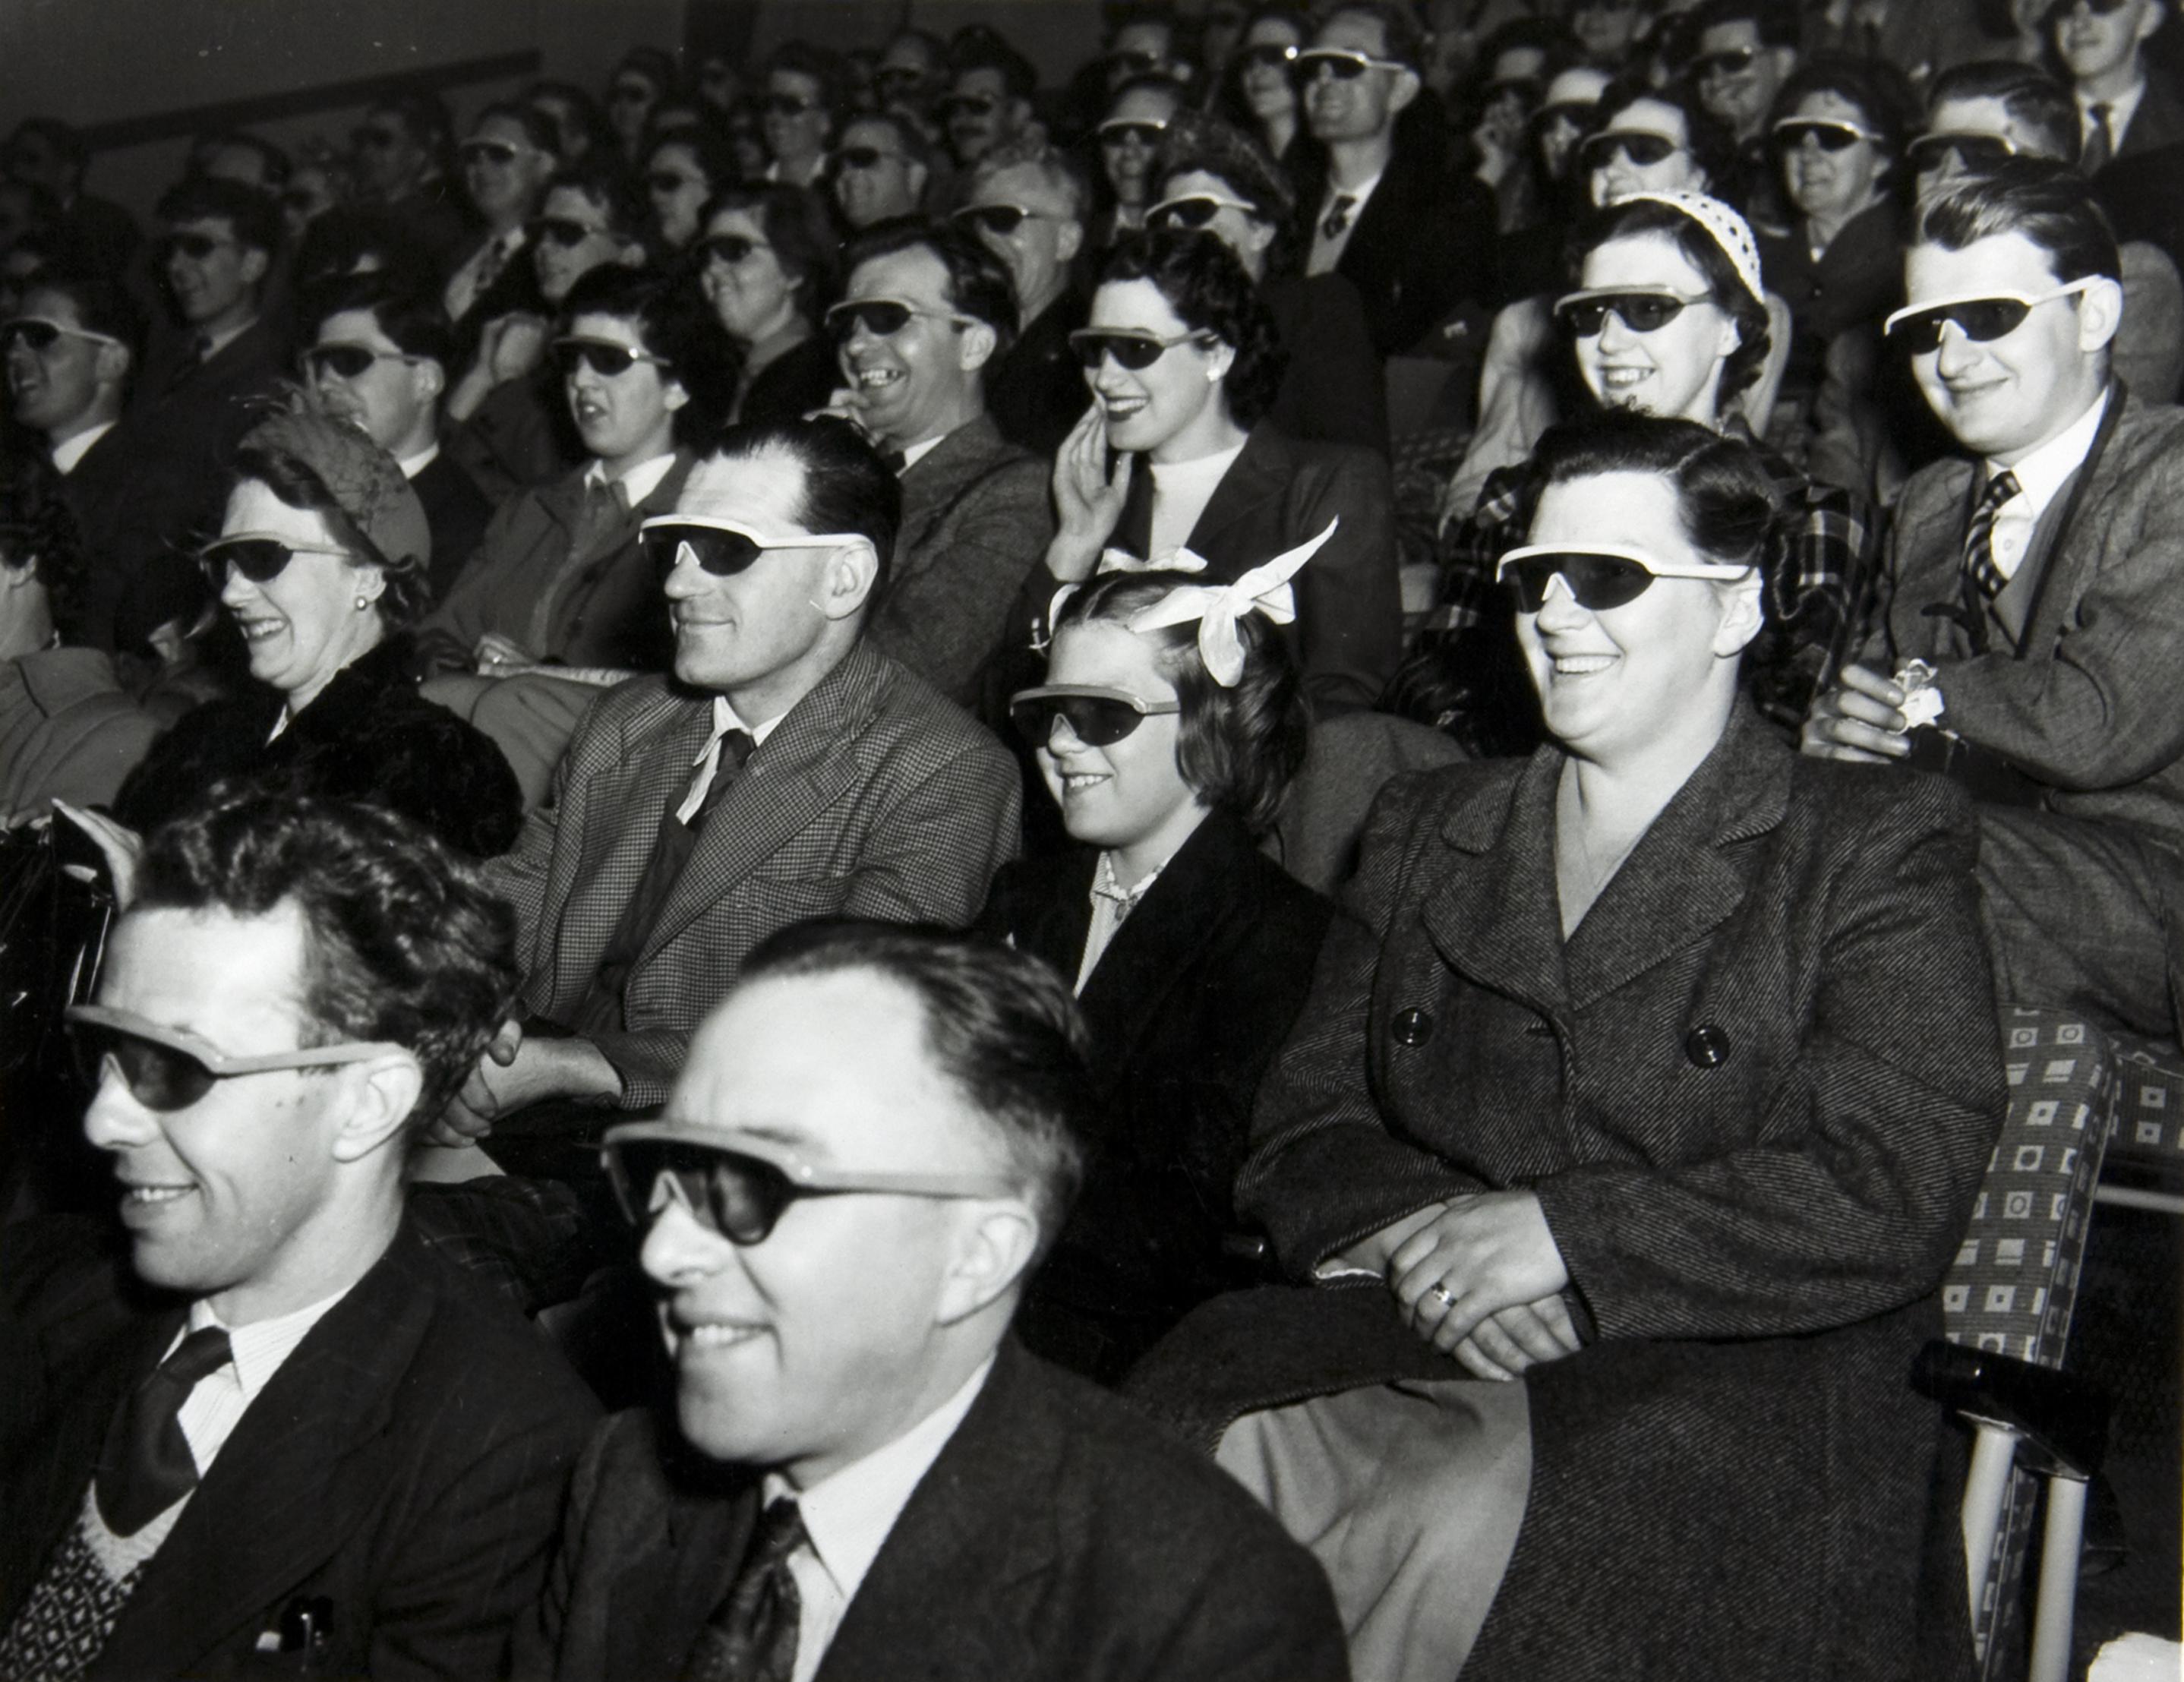 WORK25/208 (3647) Theatre audience wearing 3D glasses